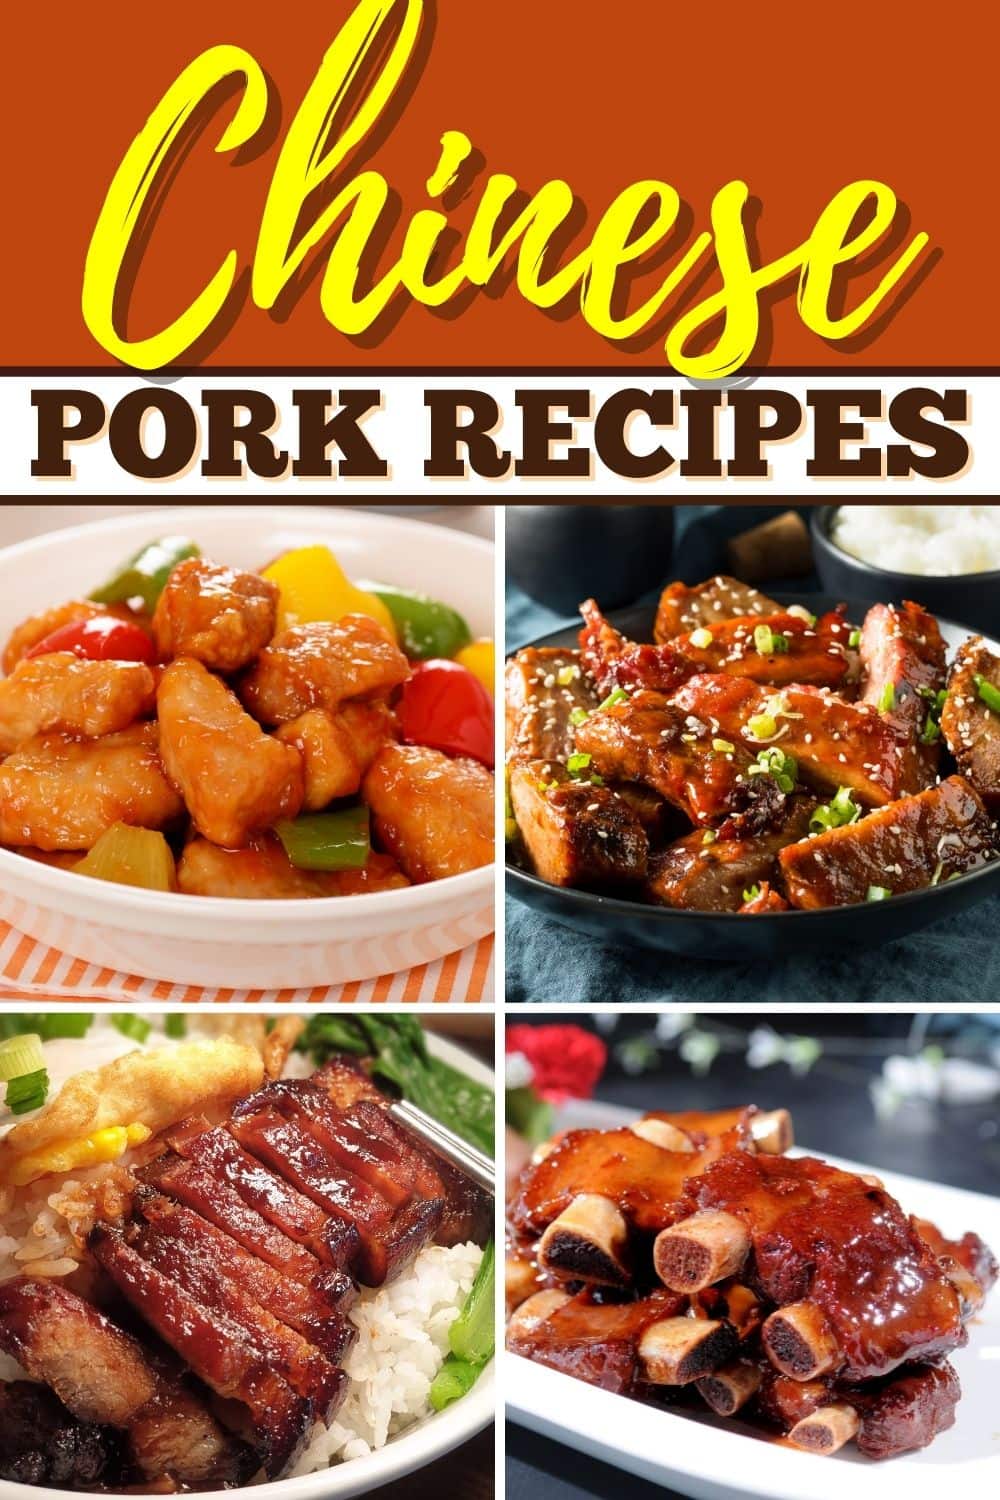 15 Authentic Chinese Pork Recipes - Insanely Good